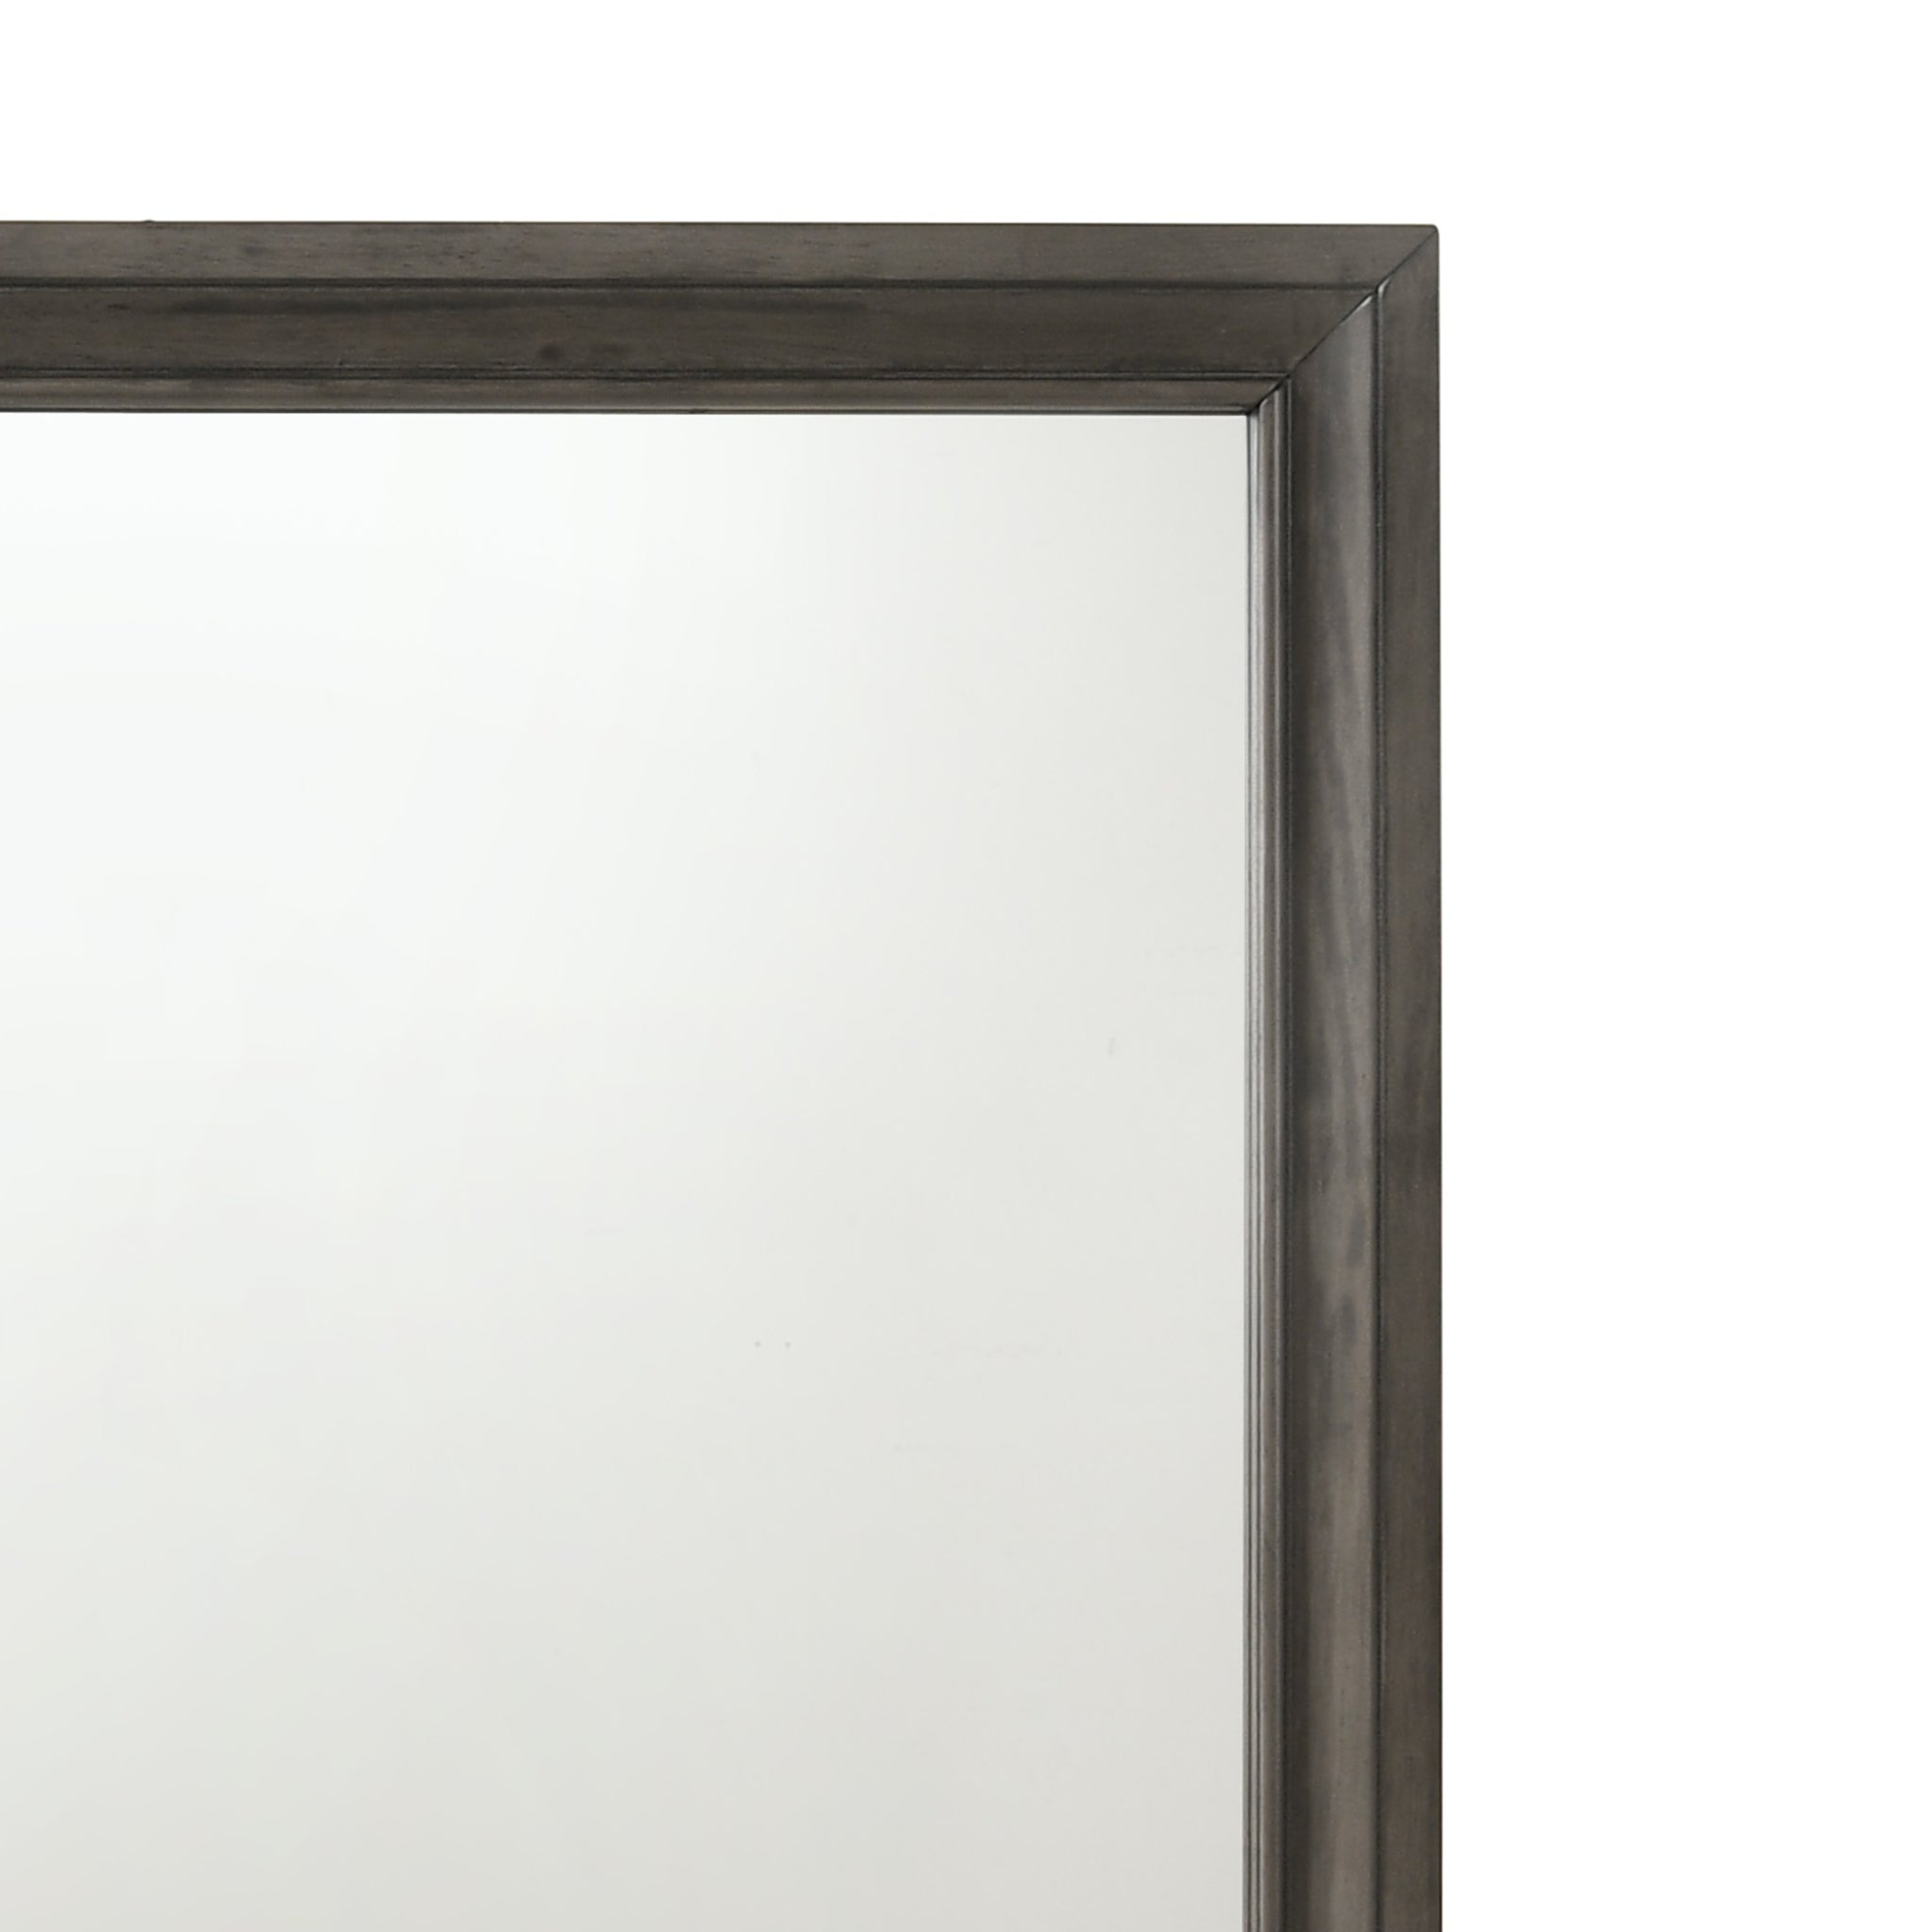 Transitional Style Wooden Decorative Mirror with